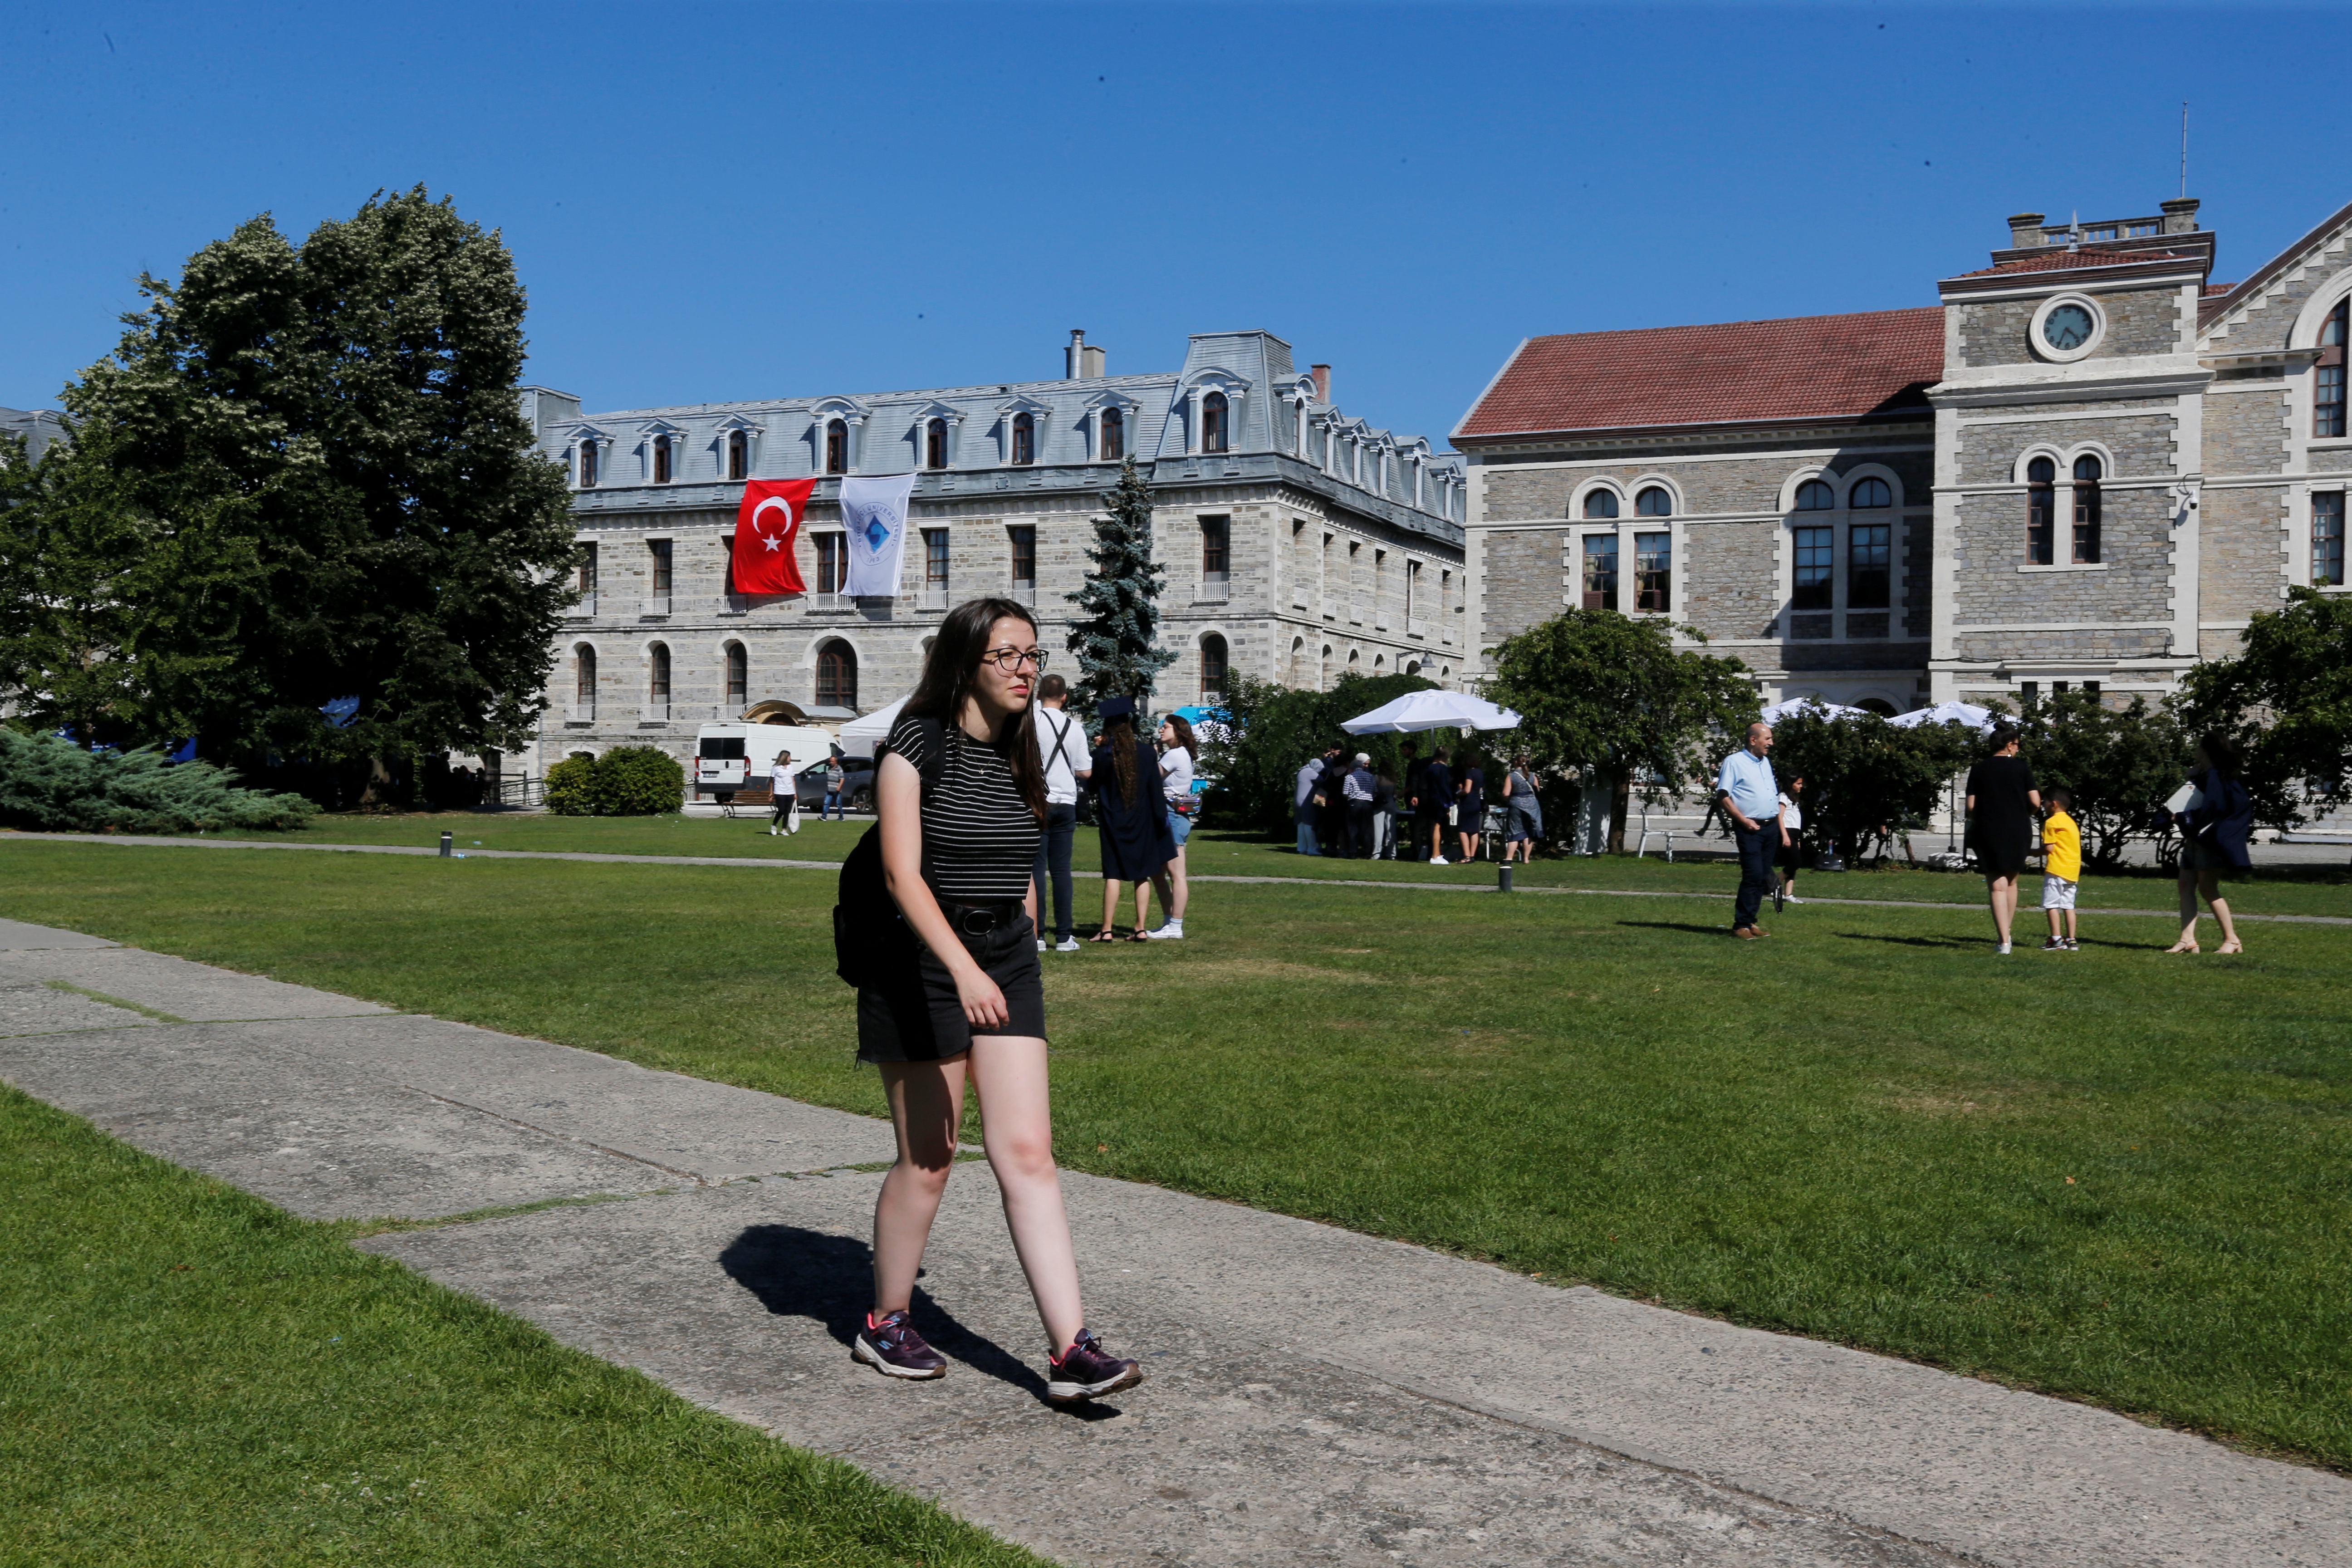 Damla, who is studying History at Bogazici University, walks at her campus, in Istanbul